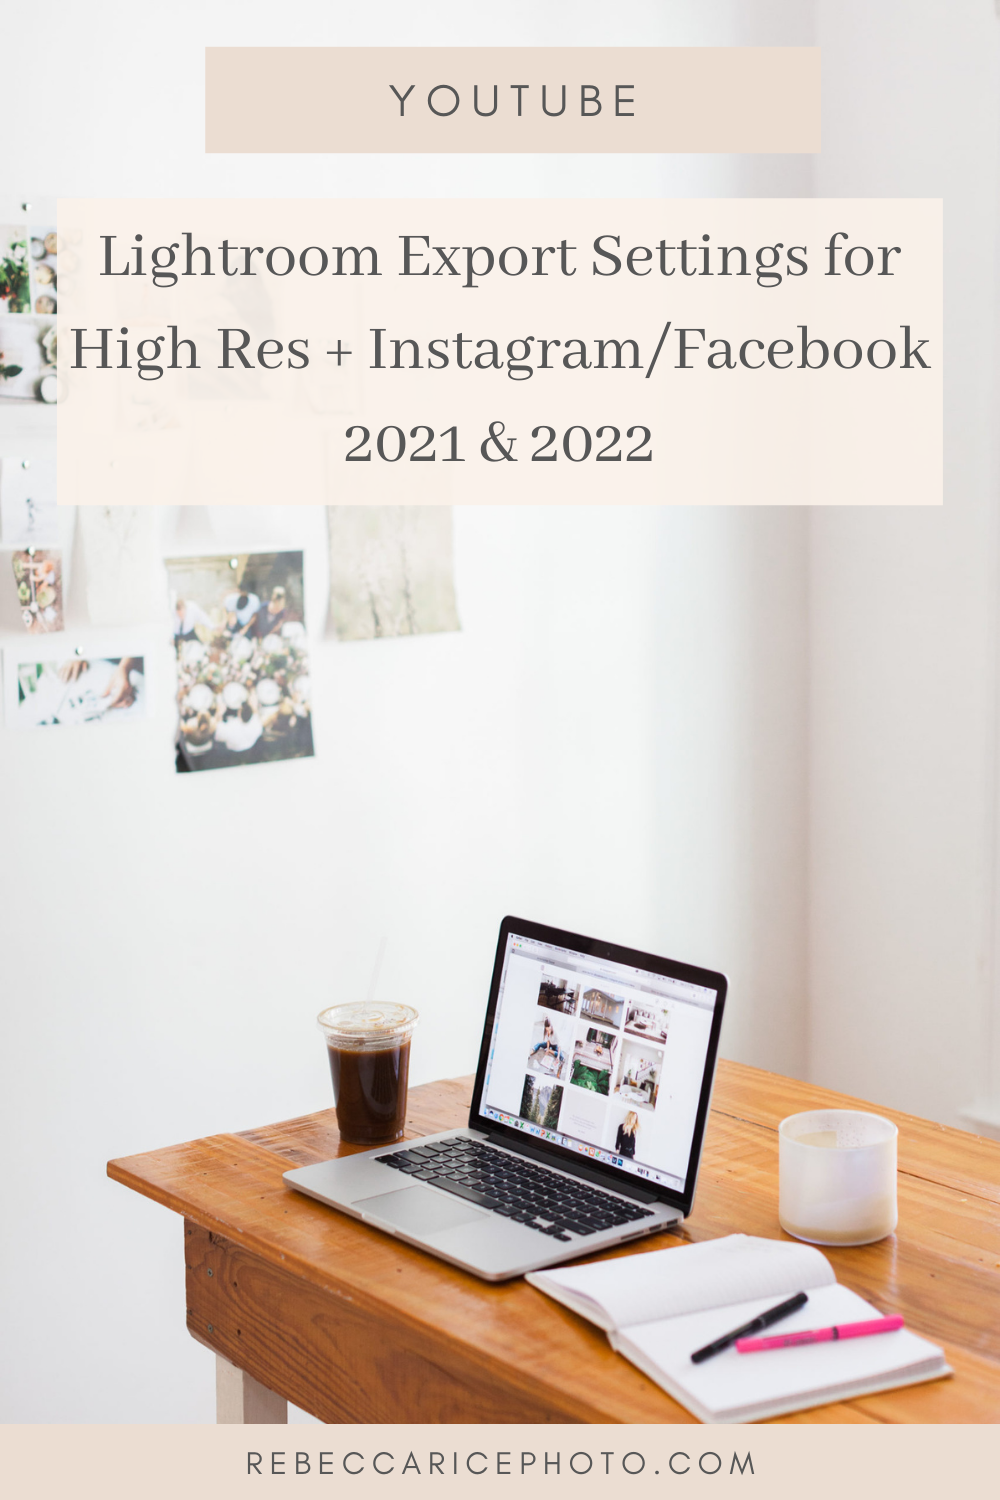 Lightroom Export Settings for High Res + Instagram/Facebook 2021 and 2022